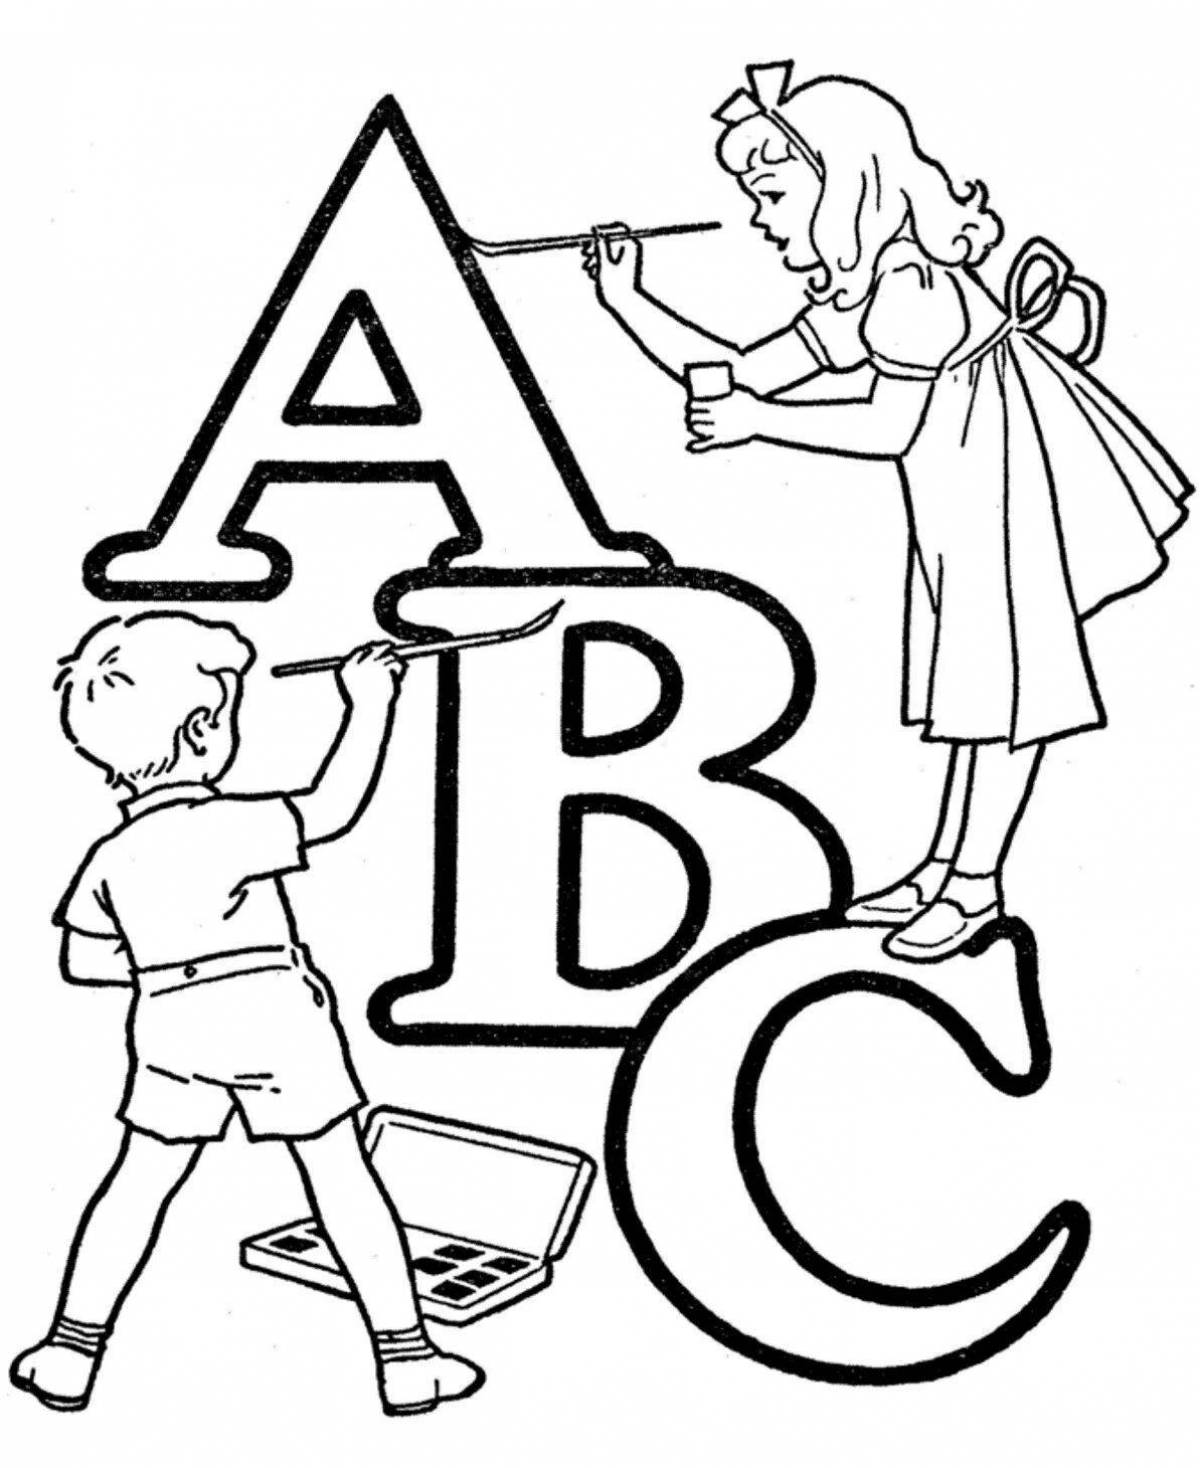 Exquisite alphabet coloring page cover